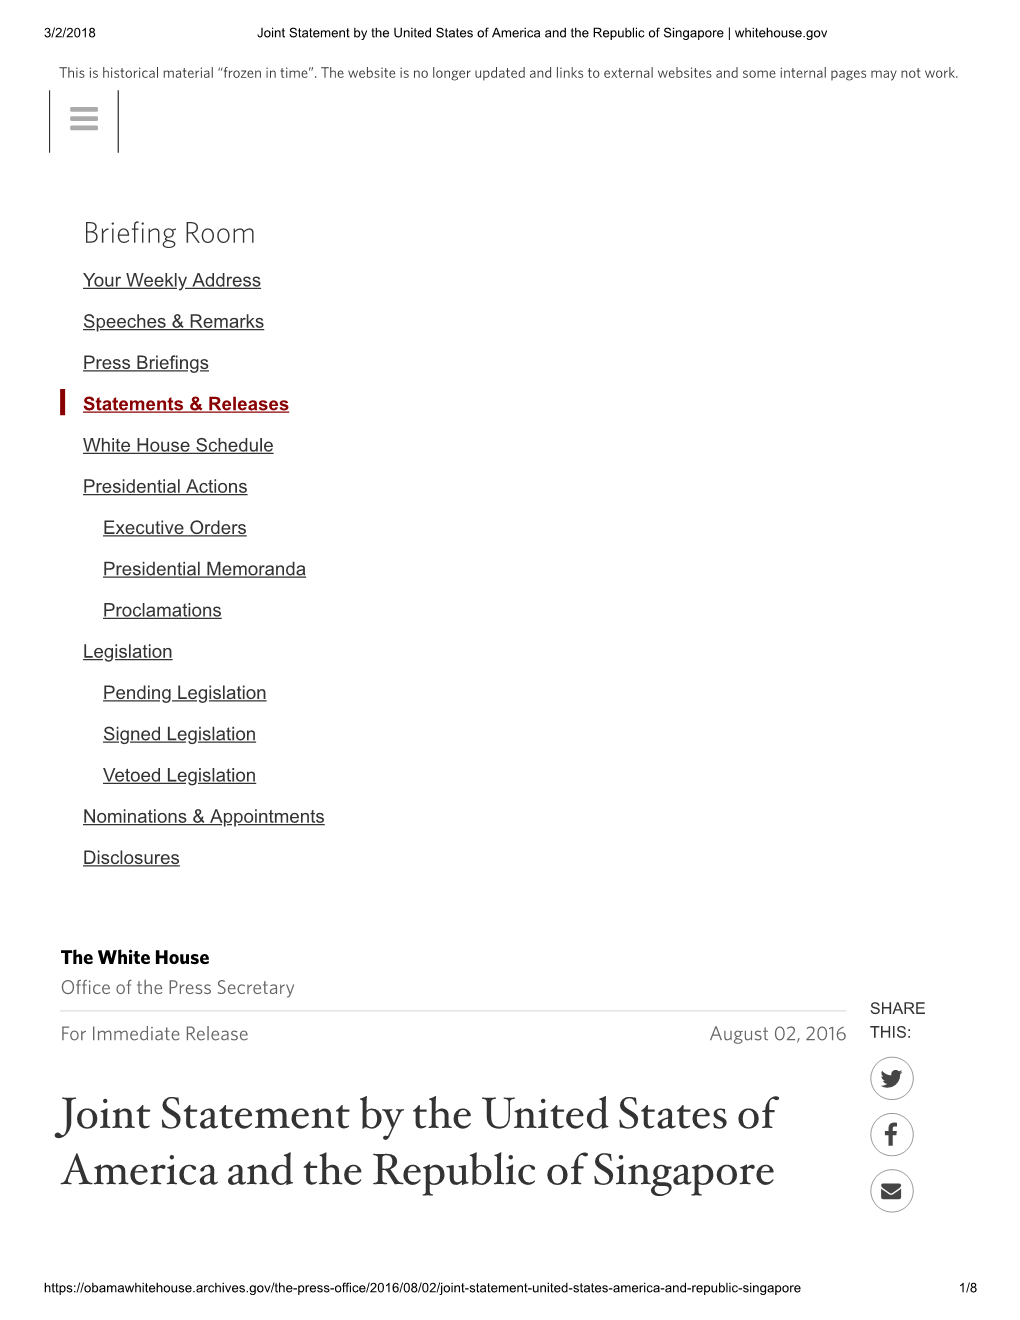 Joint Statement by the United States of America and the Republic of Singapore | Whitehouse.Gov